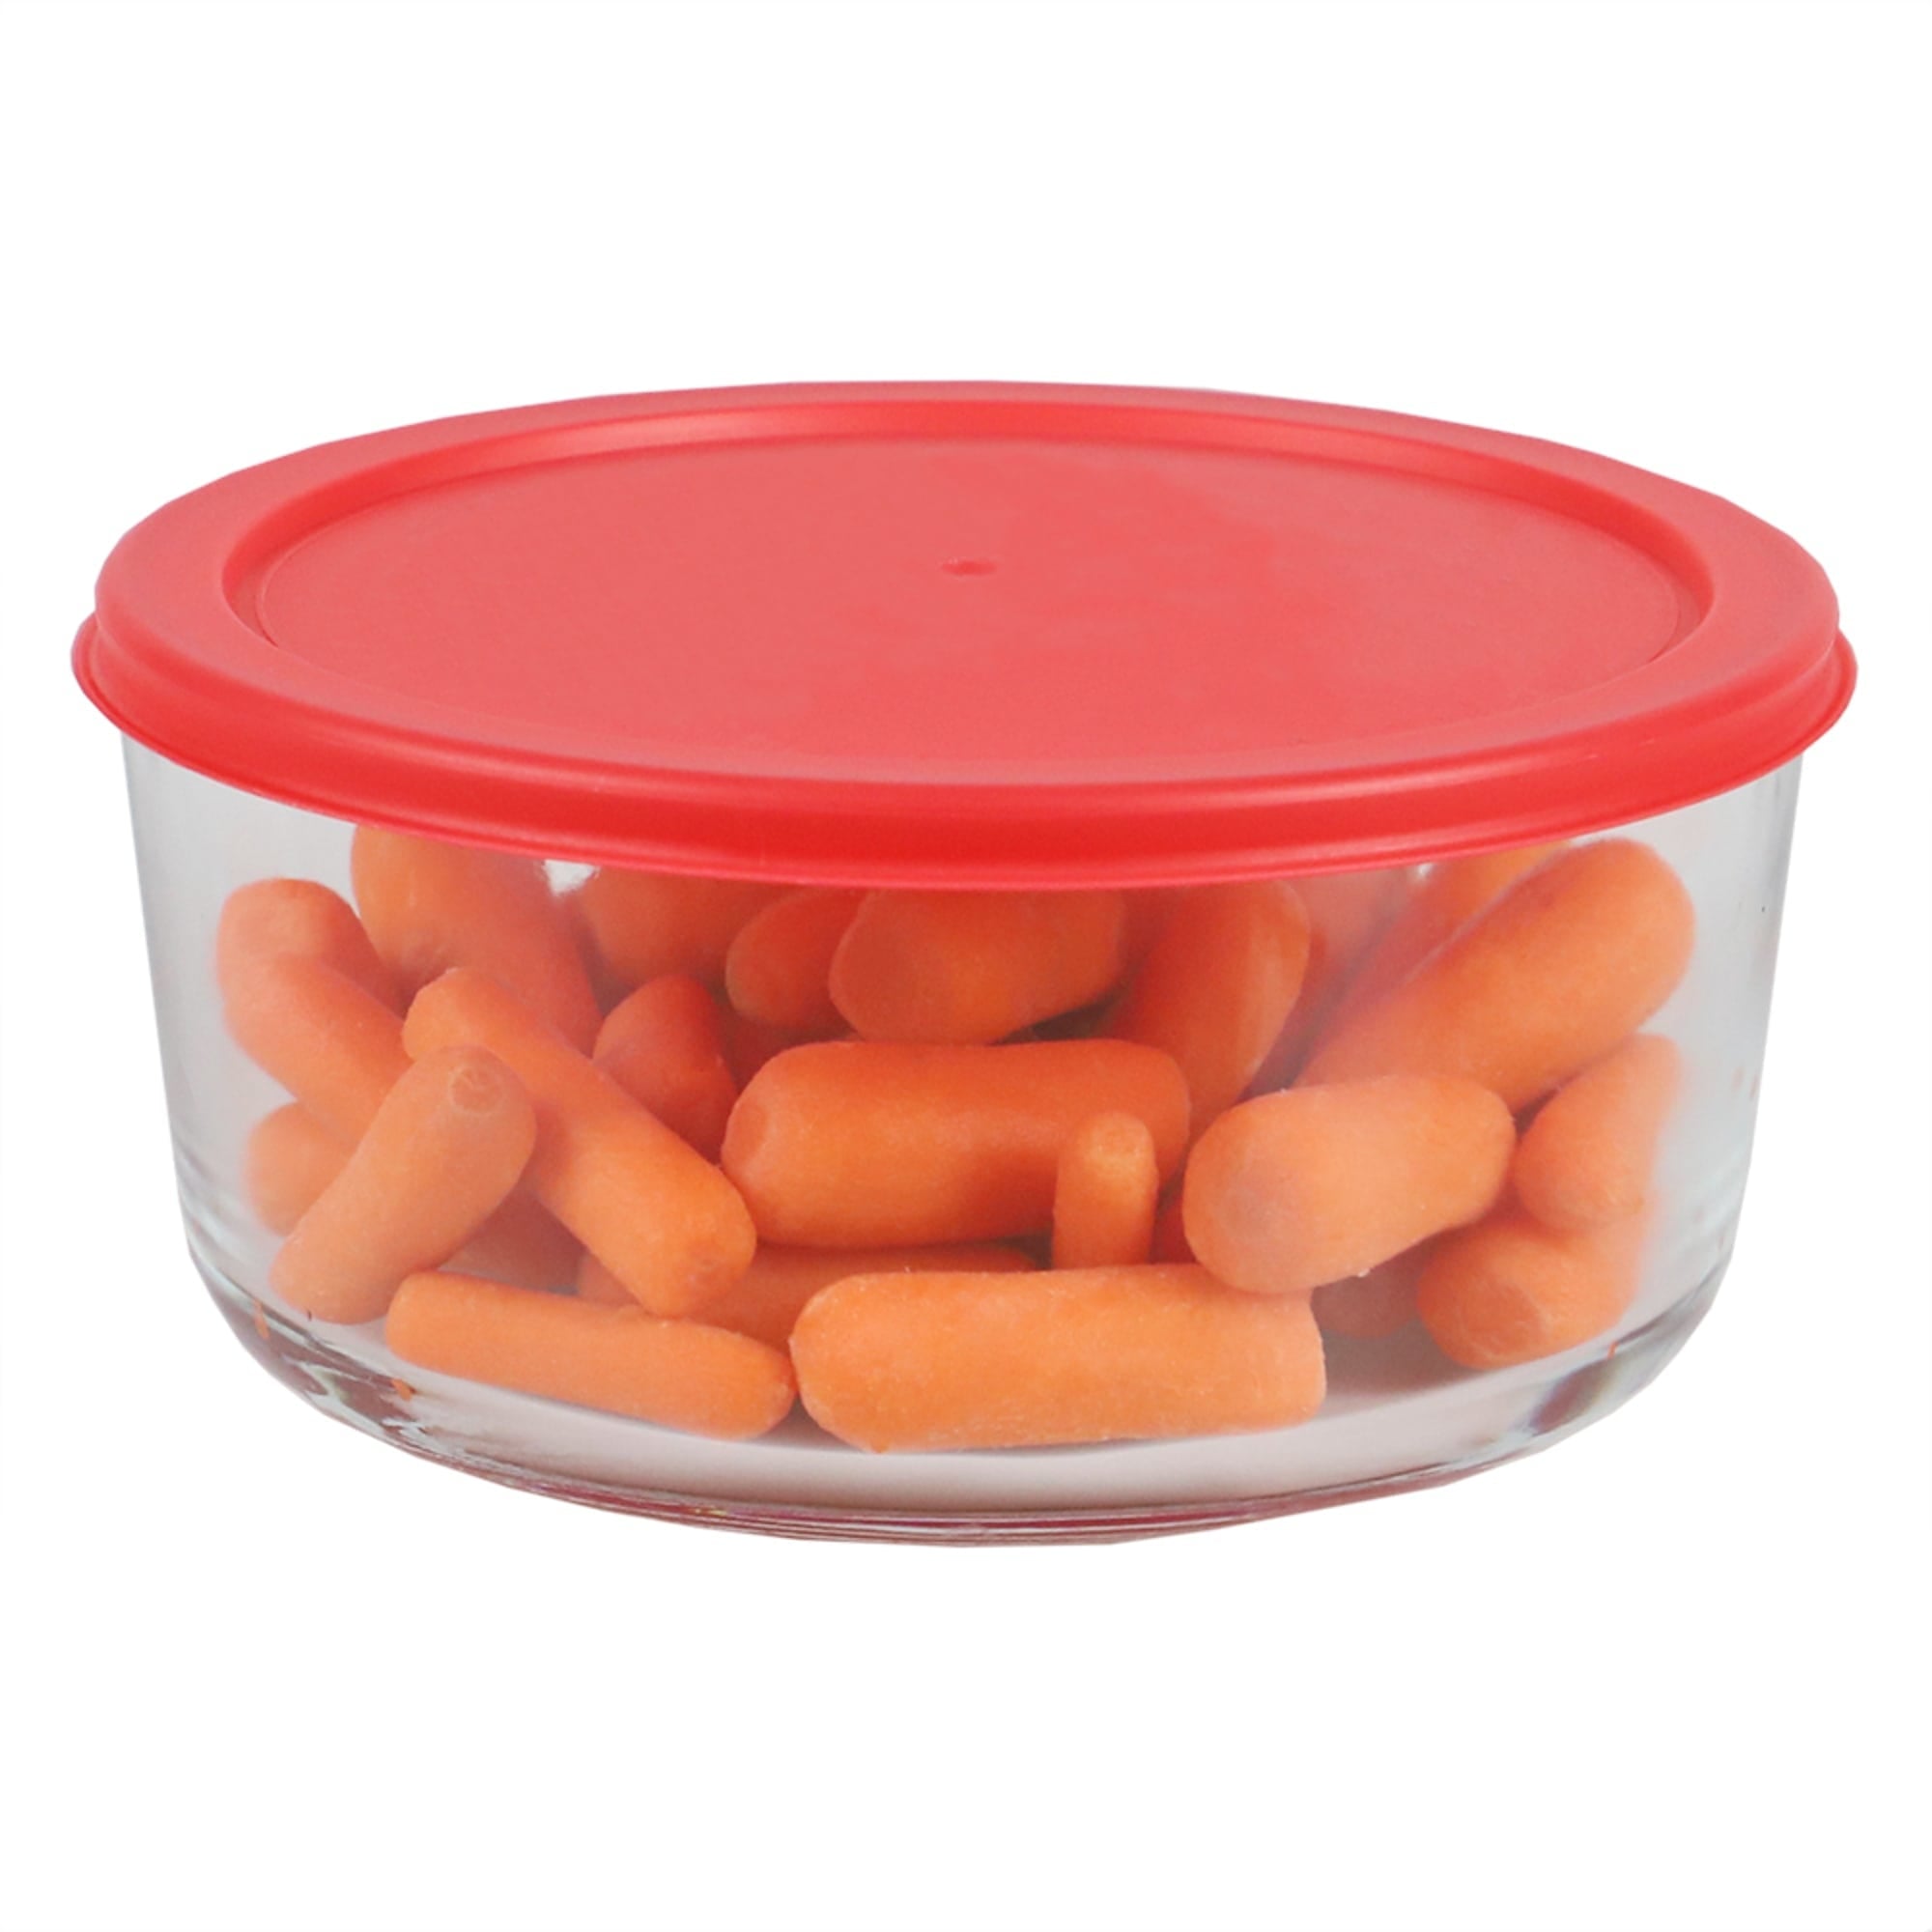 Home Basics Round 55 oz. Glass Food Storage Container with Red Lid, Clear $6.00 EACH, CASE PACK OF 12